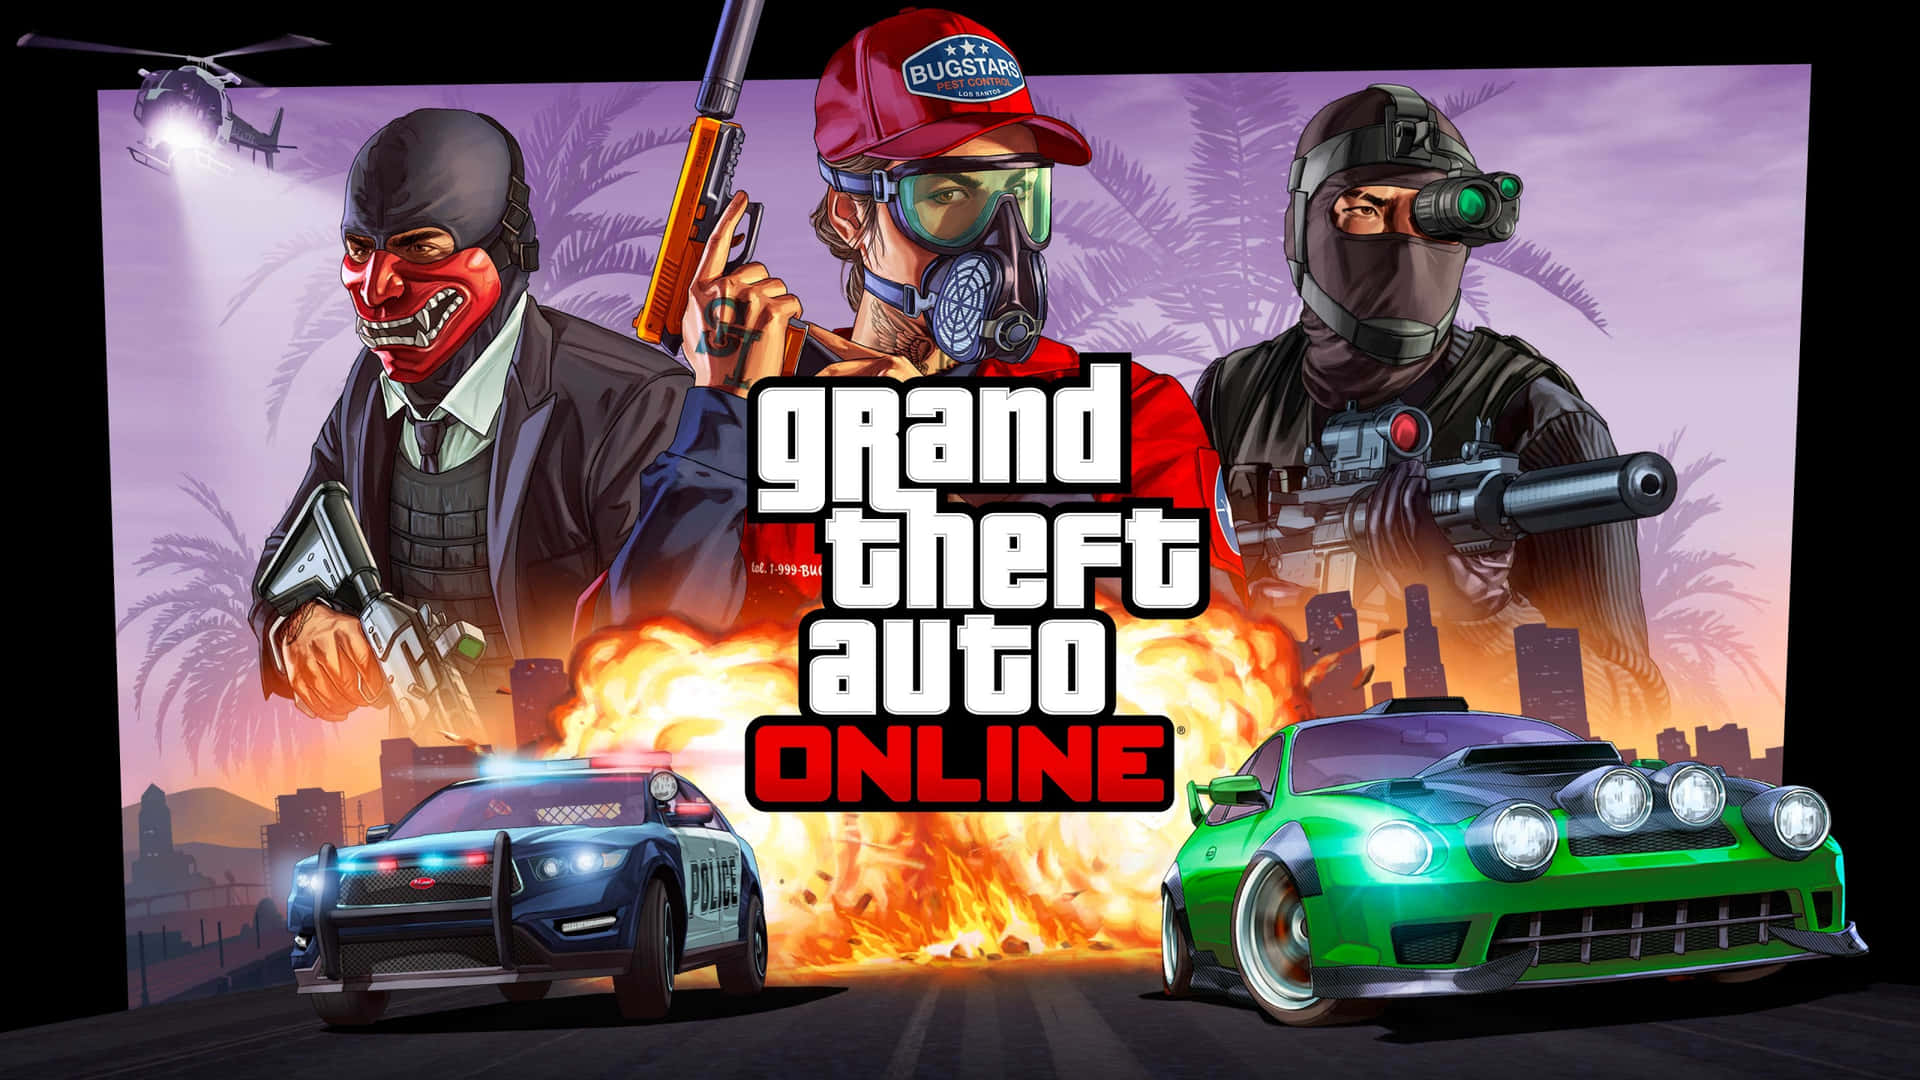 Grandtheft Auto Online - Gta Online - Gta Online - Gta Online - Gta Online. (the Sentence Is Already In English, So There Is No Translation Needed For A Portuguese Speaker.) Papel de Parede